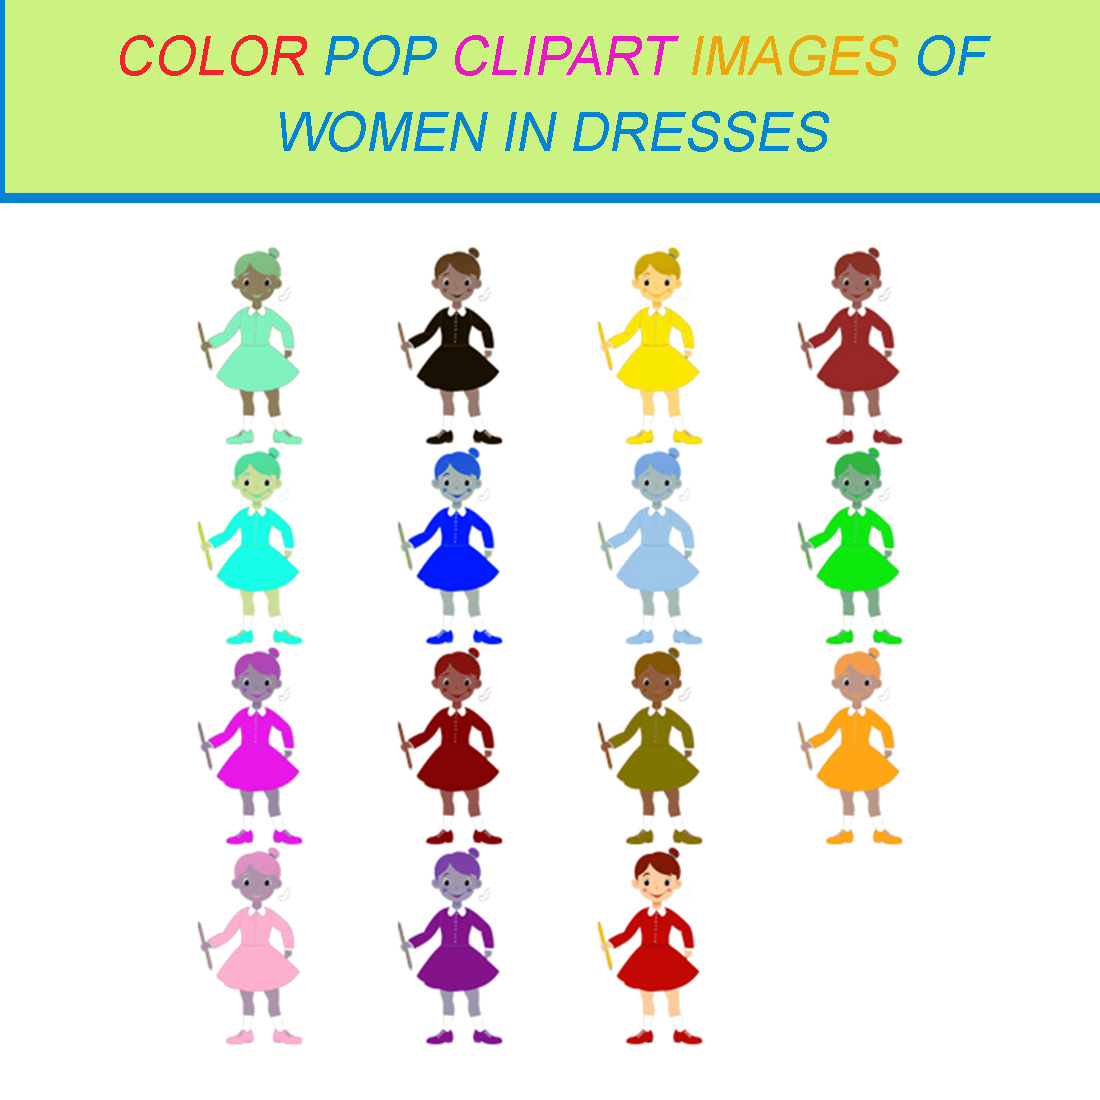 15 COLOR POP CLIPART IMAGES OF WOMEN IN DRESSES cover image.